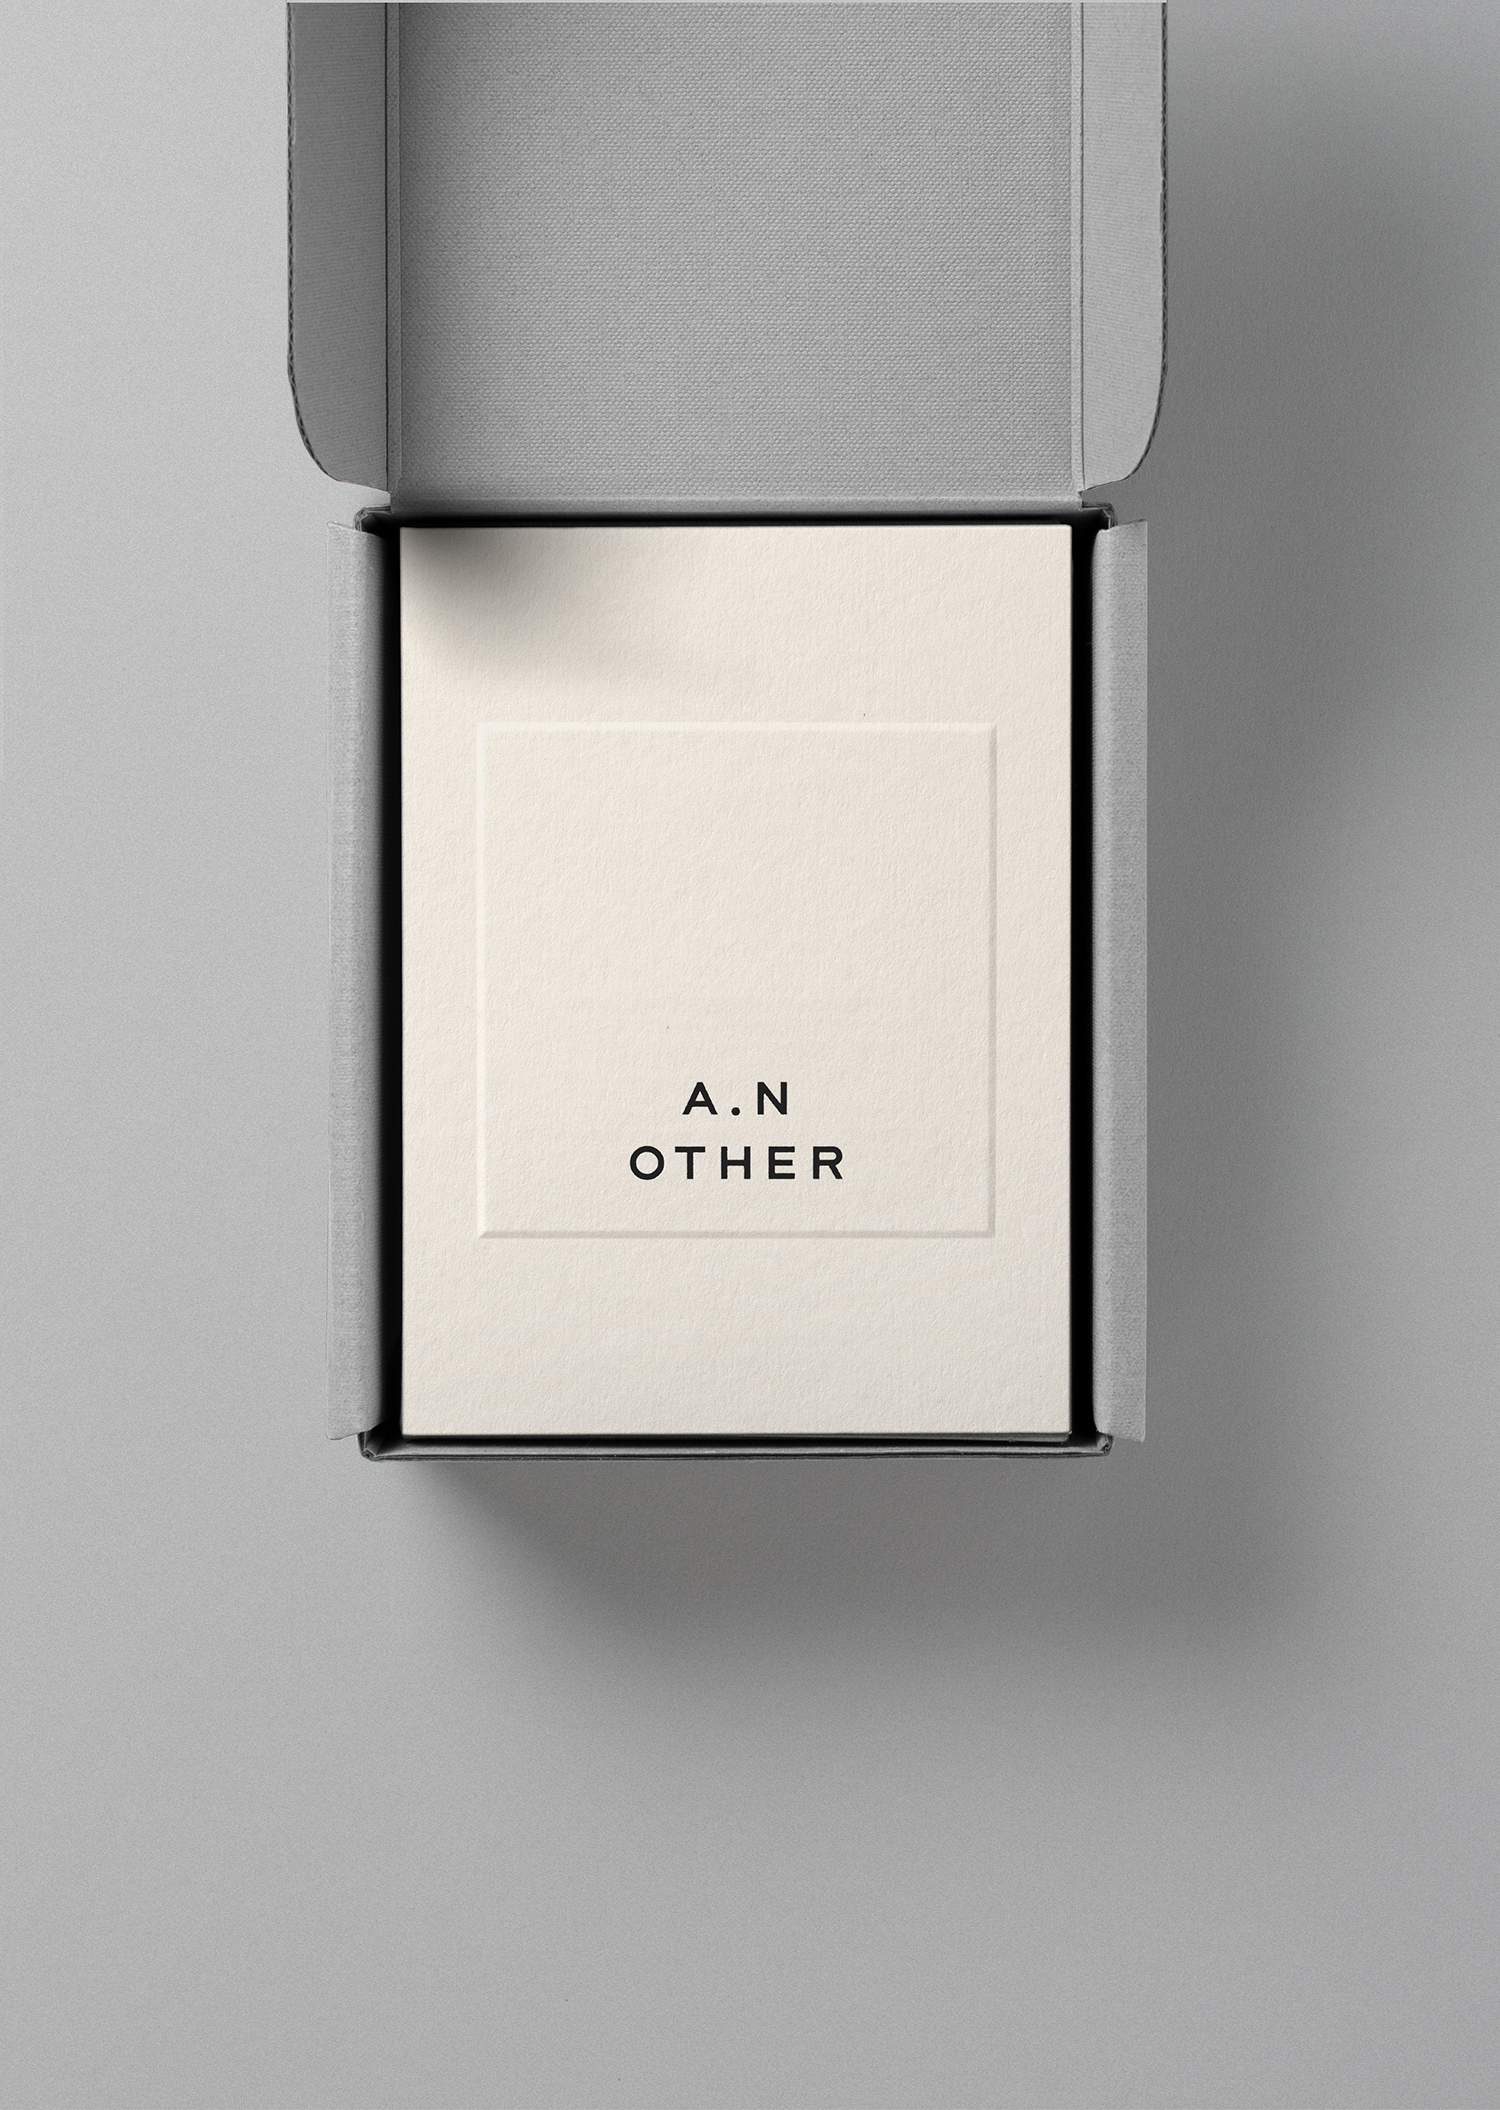 New Graphic Identity for A.N Other by Socio Design — BP&O